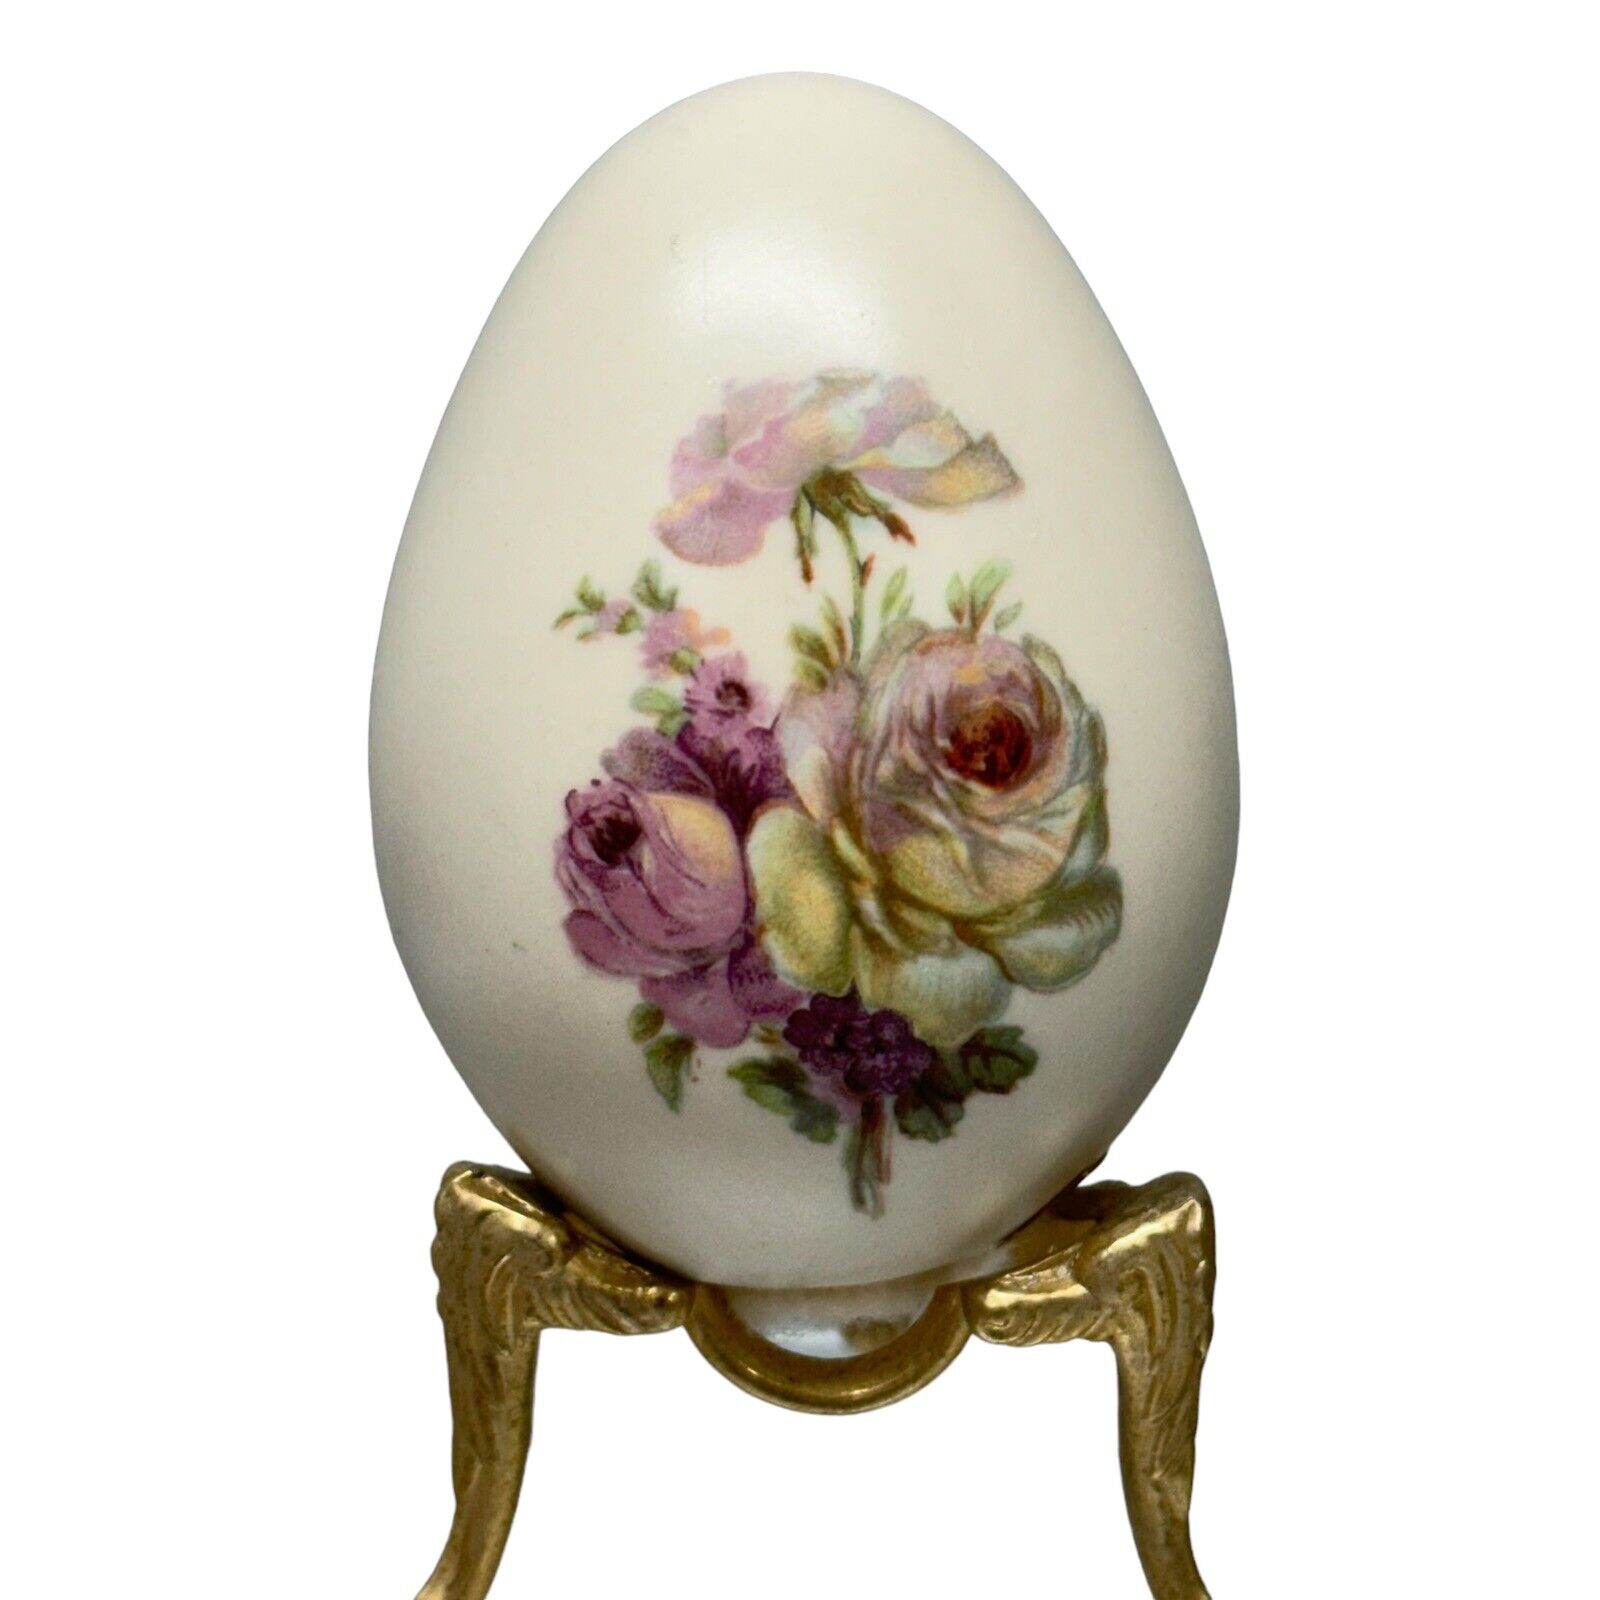 Vintage Eggzakly Porcelain Egg Floral Roses Handcrafted With Stand